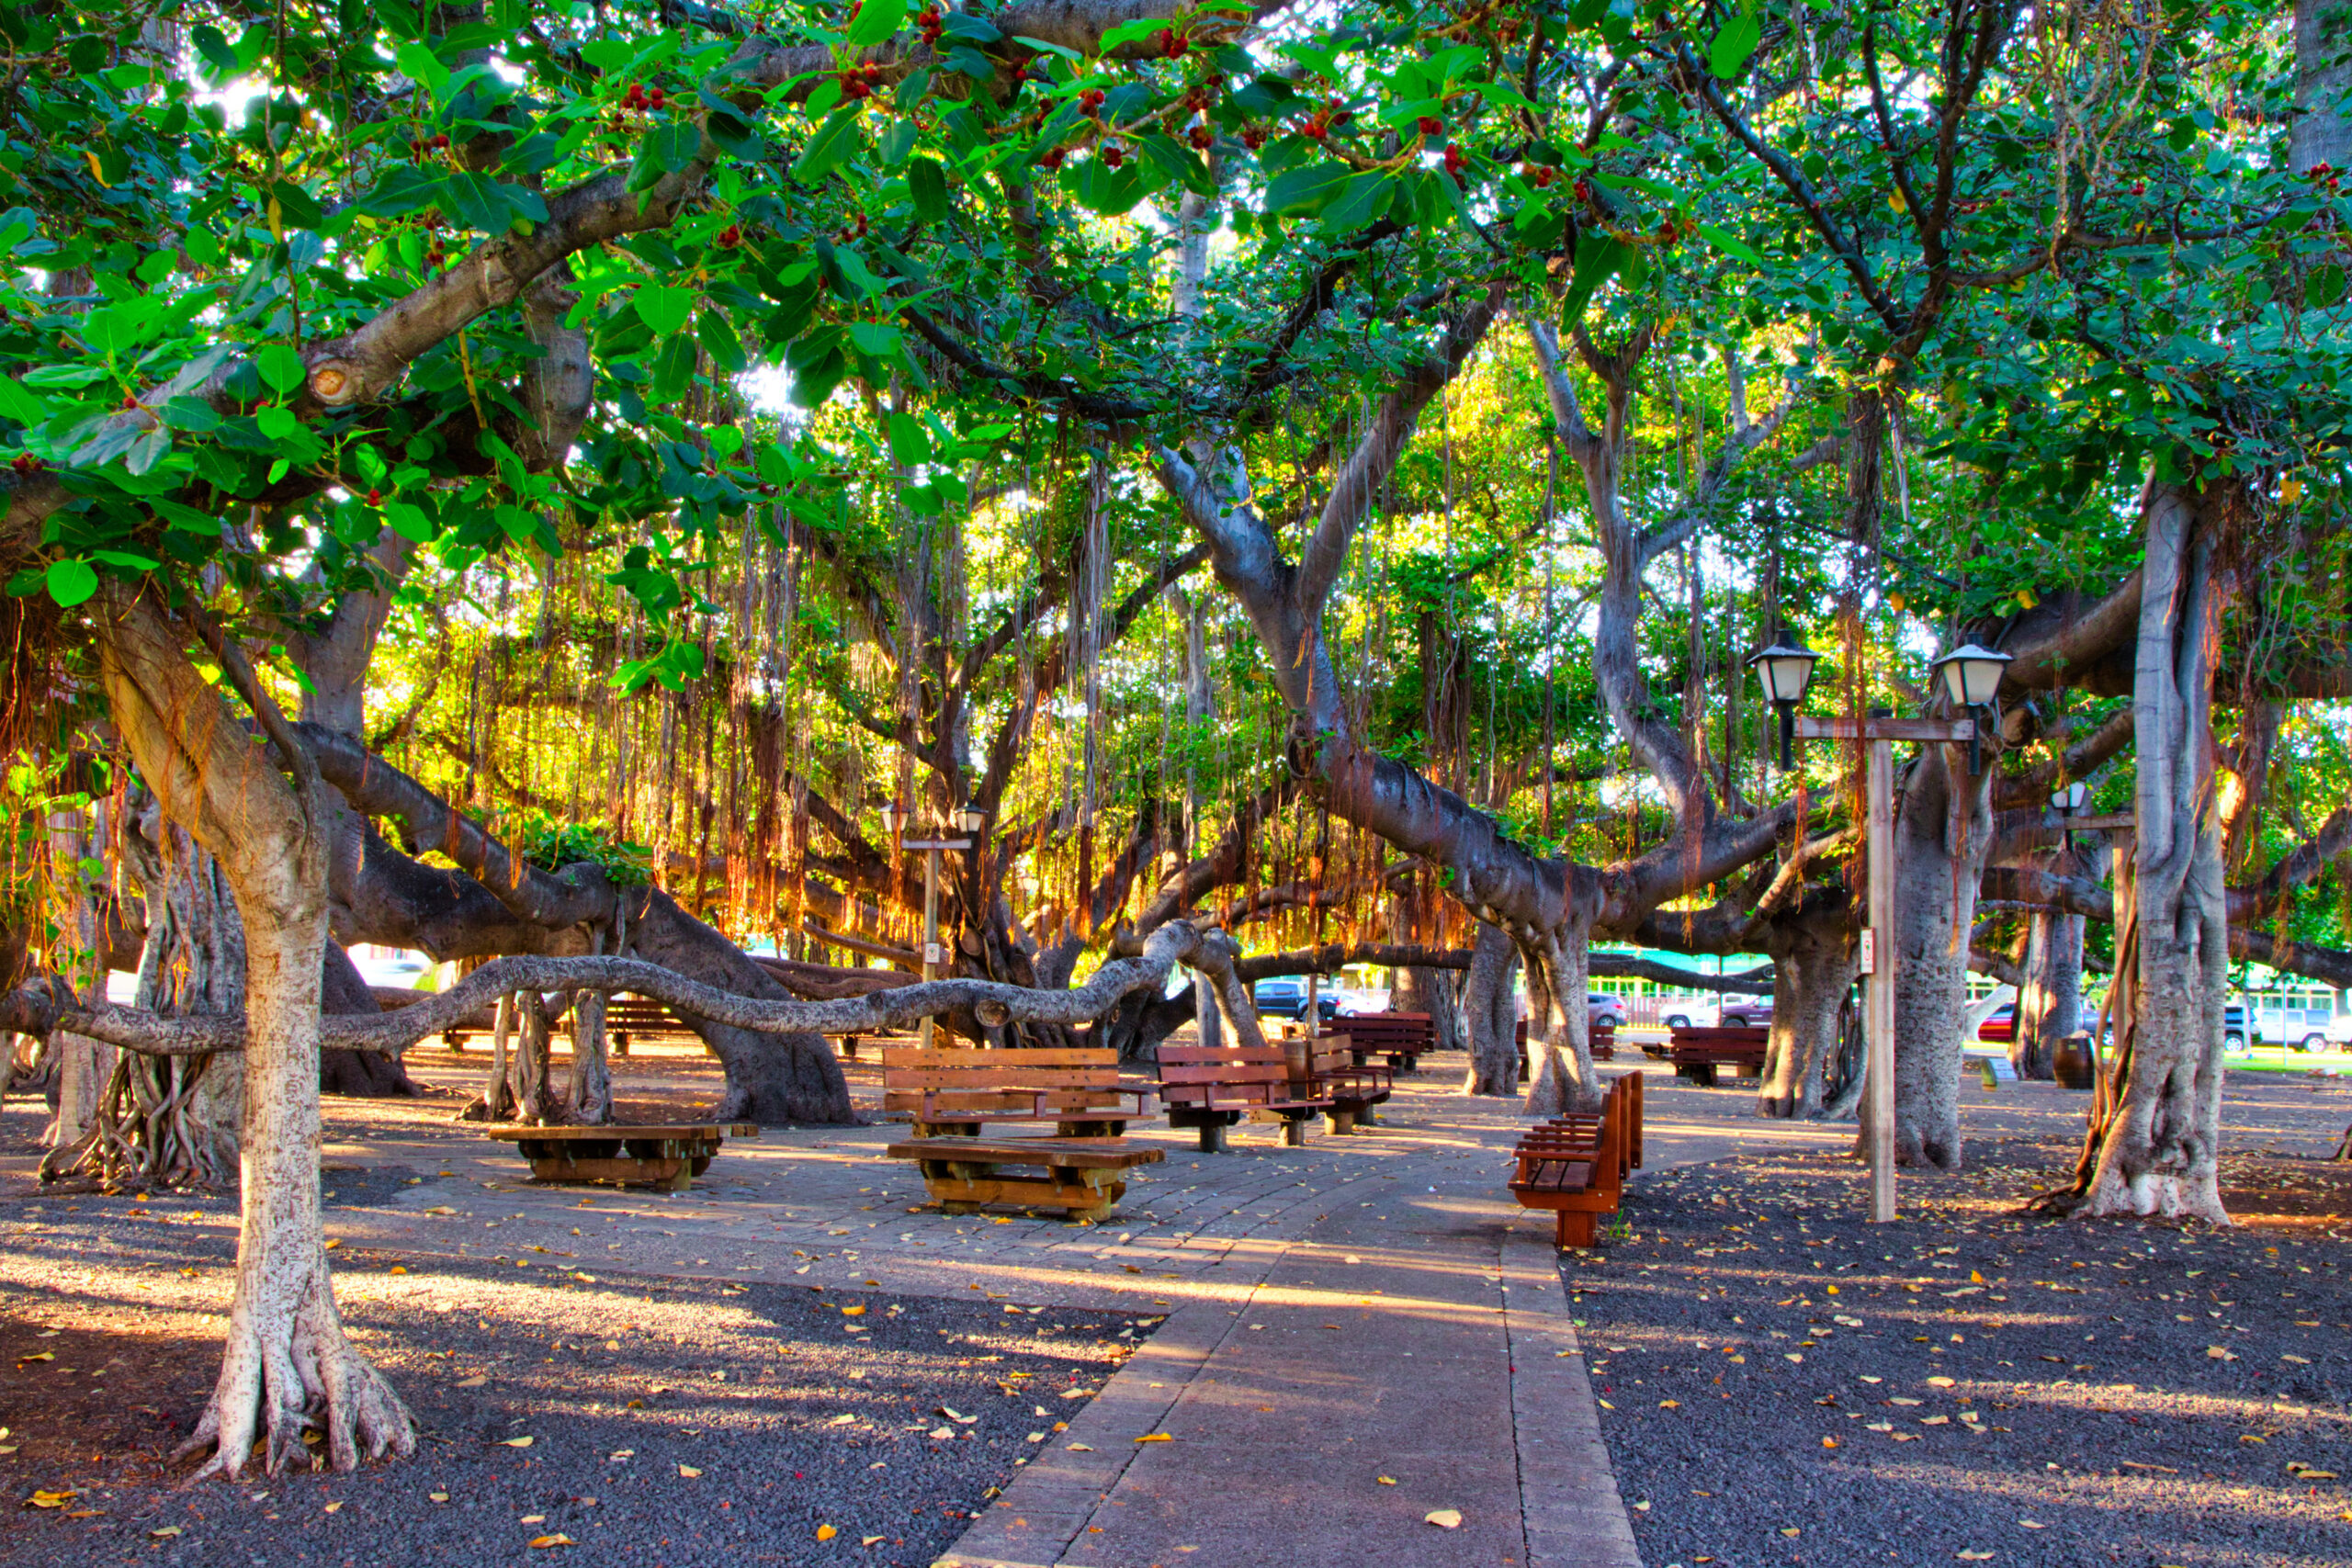 The famous Banyan Tree on Front Street in Lahaina on Maui.